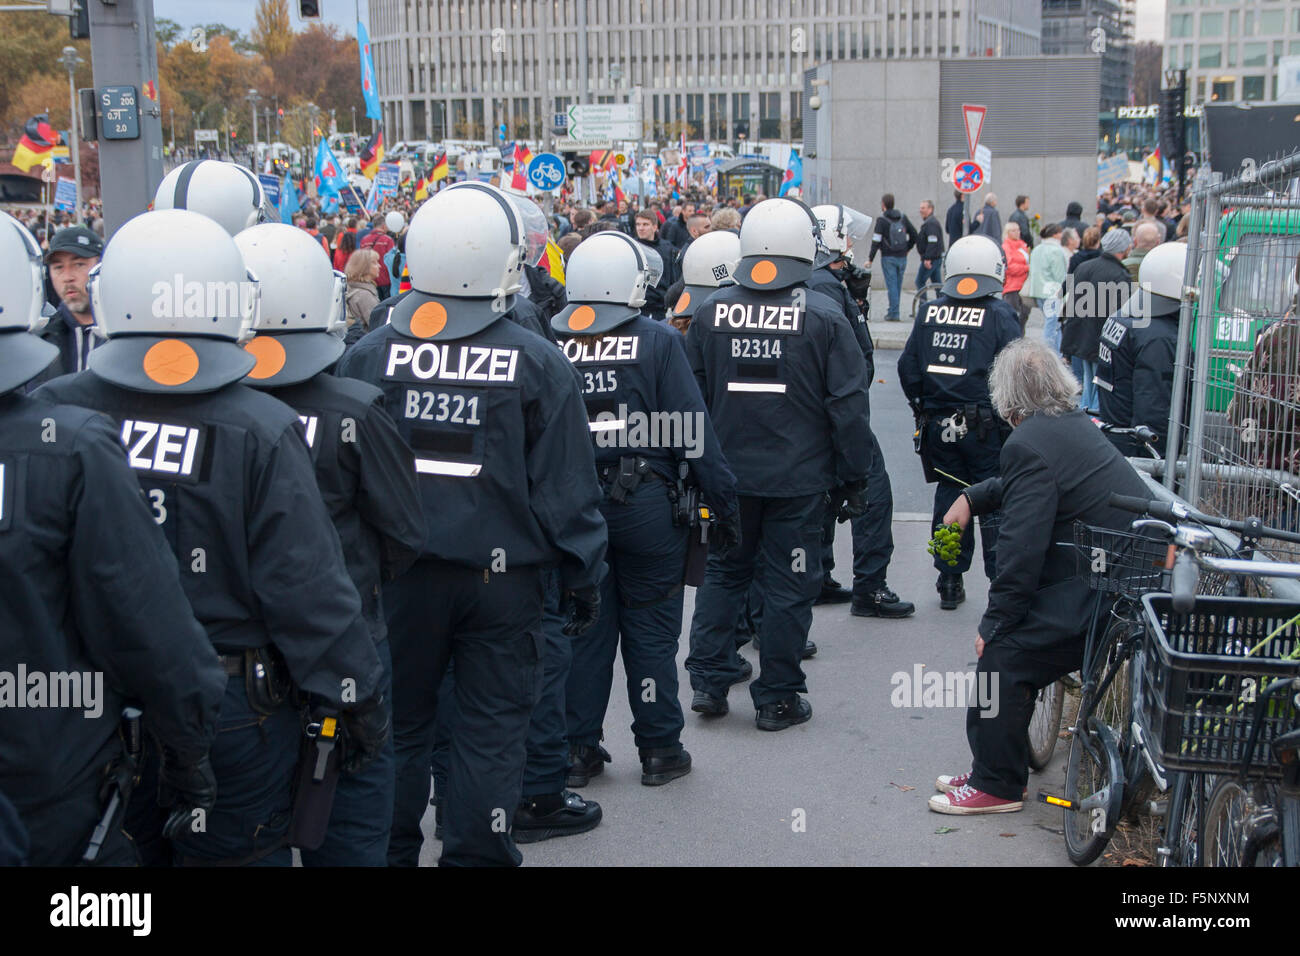 Berlin, Germany. 07th Nov, 2015. Demonstration by German party AfD in Berlin, Germany. Stock Photo